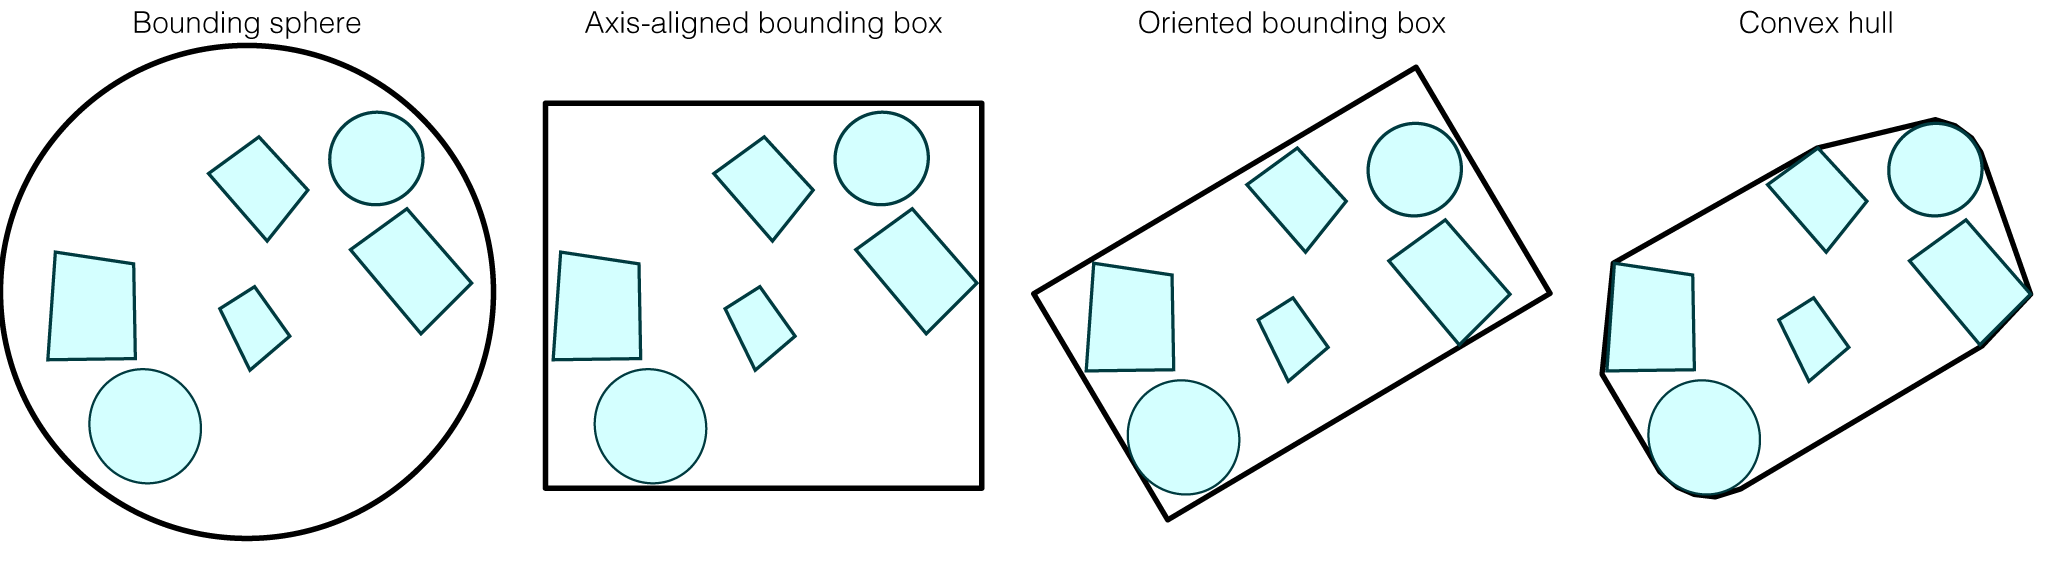 Minimal axis-aligned bounding boxes provide a good trade-off between tightness, ease of construction and ease of query evaluation.